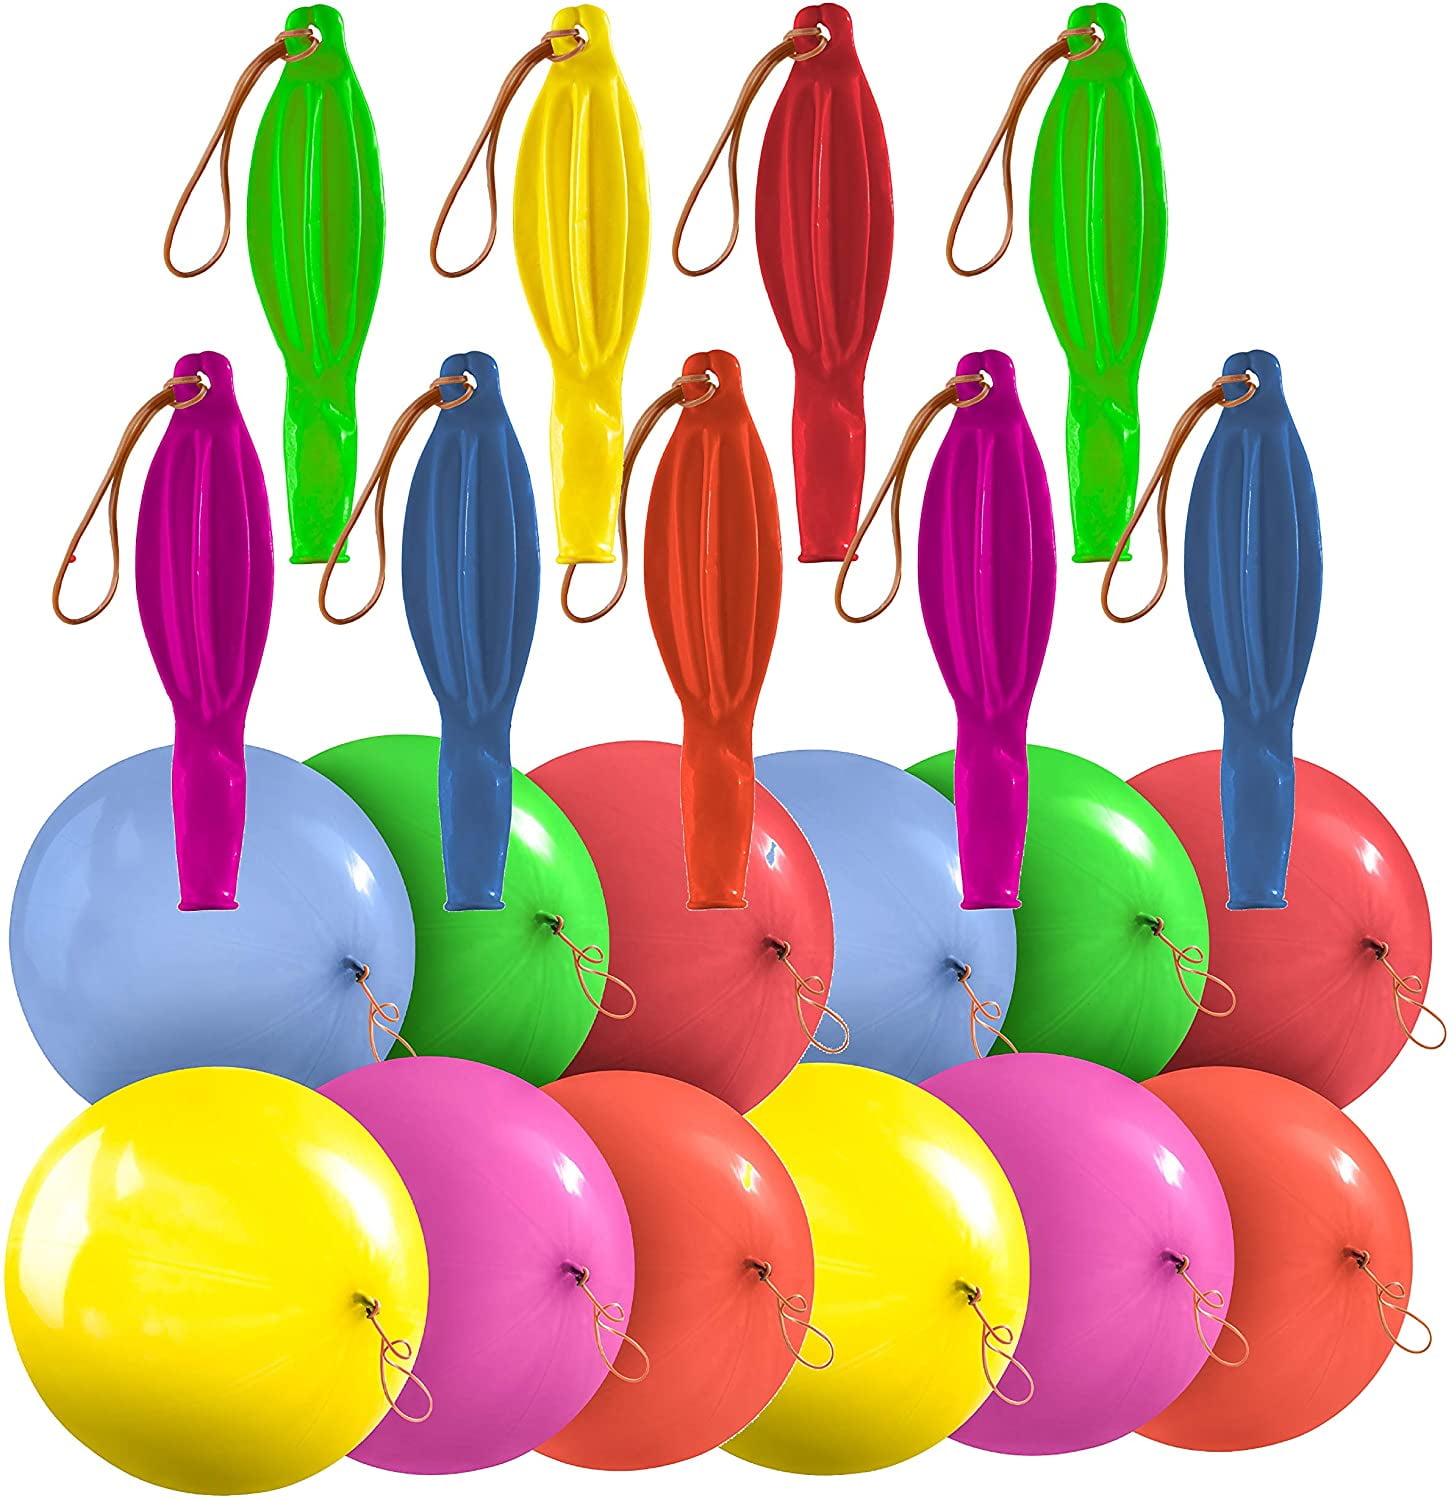 Jeu D'Adresse NHRSE 50pcs/lot Colorful Punch Balloons With A